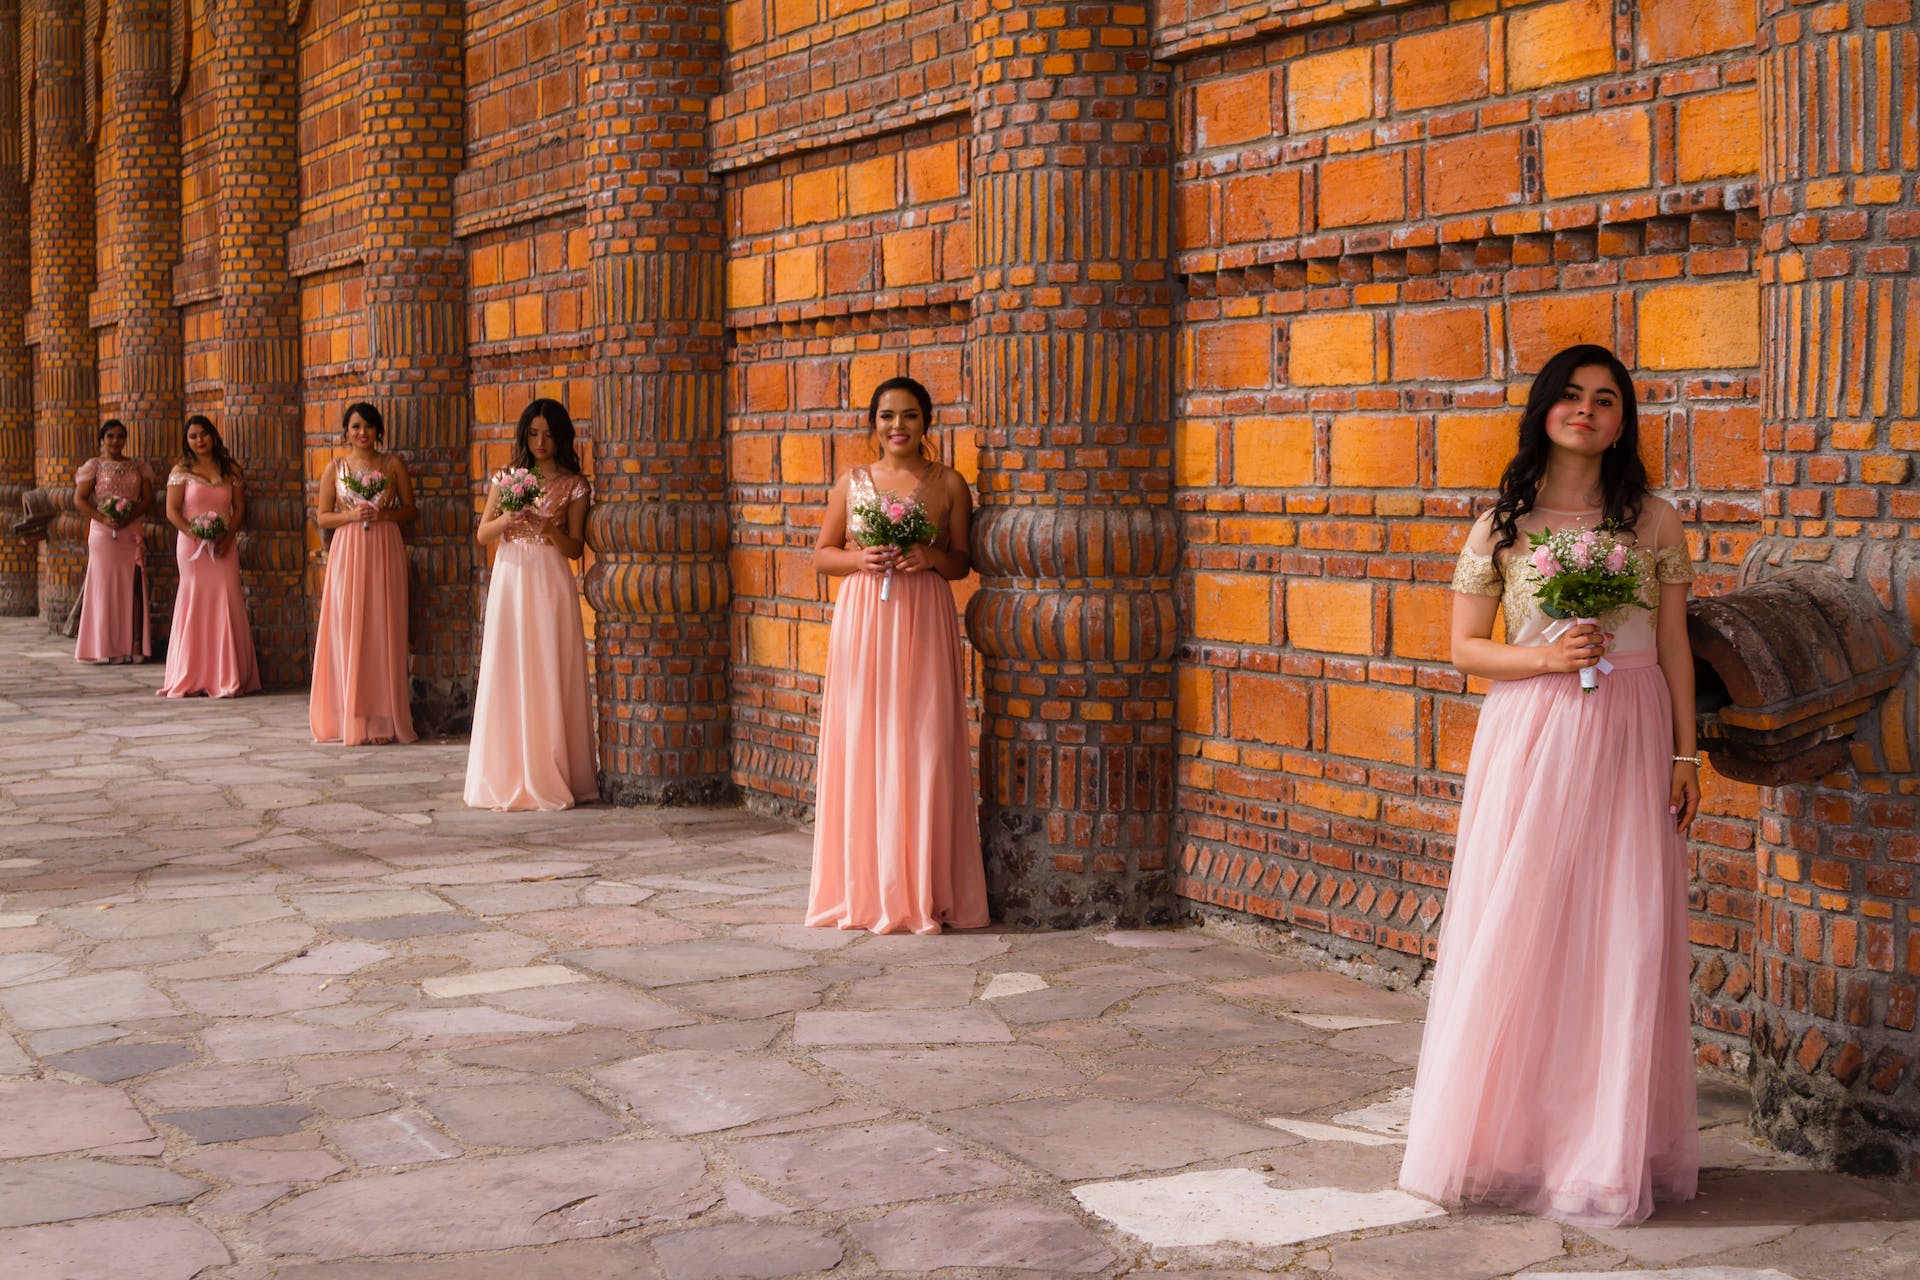 Women in pink dresses holding flowers | Source: Pexels